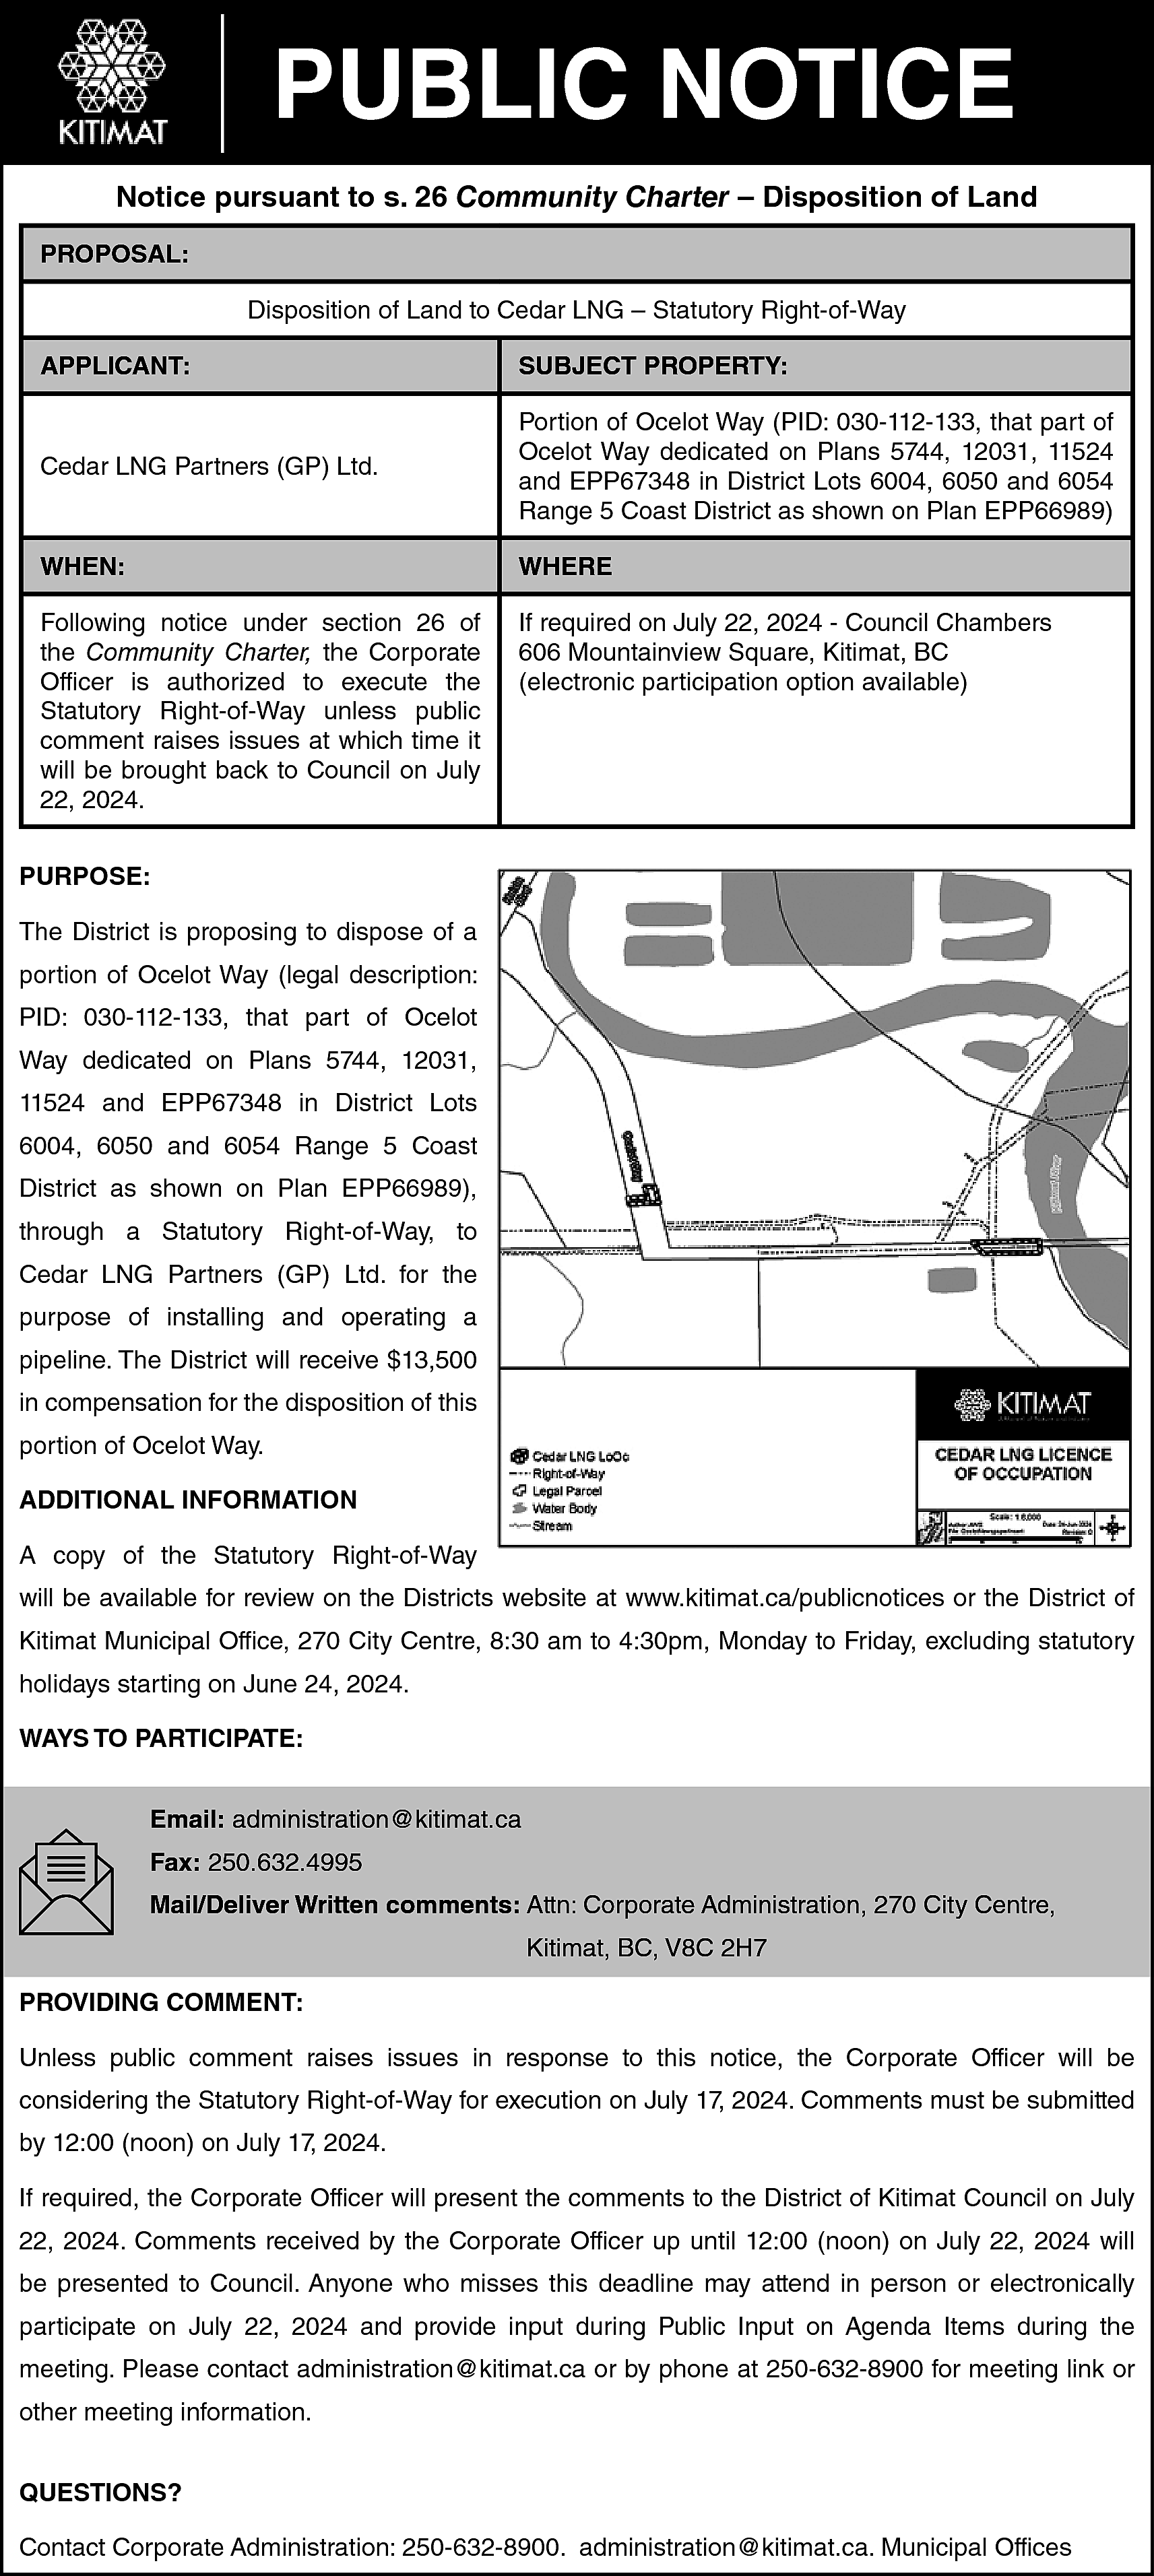 PUBLIC NOTICE <br>Notice pursuant to  PUBLIC NOTICE  Notice pursuant to s. 26 Community Charter – Disposition of Land  PROPOSAL:  Disposition of Land to Cedar LNG – Statutory Right-of-Way  APPLICANT:    SUBJECT PROPERTY:    Cedar LNG Partners (GP) Ltd.    Portion of Ocelot Way (PID: 030-112-133, that part of  Ocelot Way dedicated on Plans 5744, 12031, 11524  and EPP67348 in District Lots 6004, 6050 and 6054  Range 5 Coast District as shown on Plan EPP66989)    WHEN:    WHERE    Following notice under section 26 of  the Community Charter, the Corporate  Officer is authorized to execute the  Statutory Right-of-Way unless public  comment raises issues at which time it  will be brought back to Council on July  22, 2024.    If required on July 22, 2024 - Council Chambers  606 Mountainview Square, Kitimat, BC  (electronic participation option available)    PURPOSE:  The District is proposing to dispose of a  portion of Ocelot Way (legal description:  PID: 030-112-133, that part of Ocelot  Way dedicated on Plans 5744, 12031,  11524 and EPP67348 in District Lots  6004, 6050 and 6054 Range 5 Coast  District as shown on Plan EPP66989),  through a Statutory Right-of-Way, to  Cedar LNG Partners (GP) Ltd. for the  purpose of installing and operating a  pipeline. The District will receive $13,500  in compensation for the disposition of this  portion of Ocelot Way.  ADDITIONAL INFORMATION  A copy of the Statutory Right-of-Way  will be available for review on the Districts website at www.kitimat.ca/publicnotices or the District of  Kitimat Municipal Office, 270 City Centre, 8:30 am to 4:30pm, Monday to Friday, excluding statutory  holidays starting on June 24, 2024.  WAYS TO PARTICIPATE:  Email: administration@kitimat.ca  Fax: 250.632.4995  Mail/Deliver Written comments: Attn: Corporate Administration, 270 City Centre,  Kitimat, BC, V8C 2H7  PROVIDING COMMENT:  Unless public comment raises issues in response to this notice, the Corporate Officer will be  considering the Statutory Right-of-Way for execution on July 17, 2024. Comments must be submitted  by 12:00 (noon) on July 17, 2024.  If required, the Corporate Officer will present the comments to the District of Kitimat Council on July  22, 2024. Comments received by the Corporate Officer up until 12:00 (noon) on July 22, 2024 will  be presented to Council. Anyone who misses this deadline may attend in person or electronically  participate on July 22, 2024 and provide input during Public Input on Agenda Items during the  meeting. Please contact administration@kitimat.ca or by phone at 250-632-8900 for meeting link or  other meeting information.  QUESTIONS?  Contact Corporate Administration: 250-632-8900. administration@kitimat.ca. Municipal Offices    